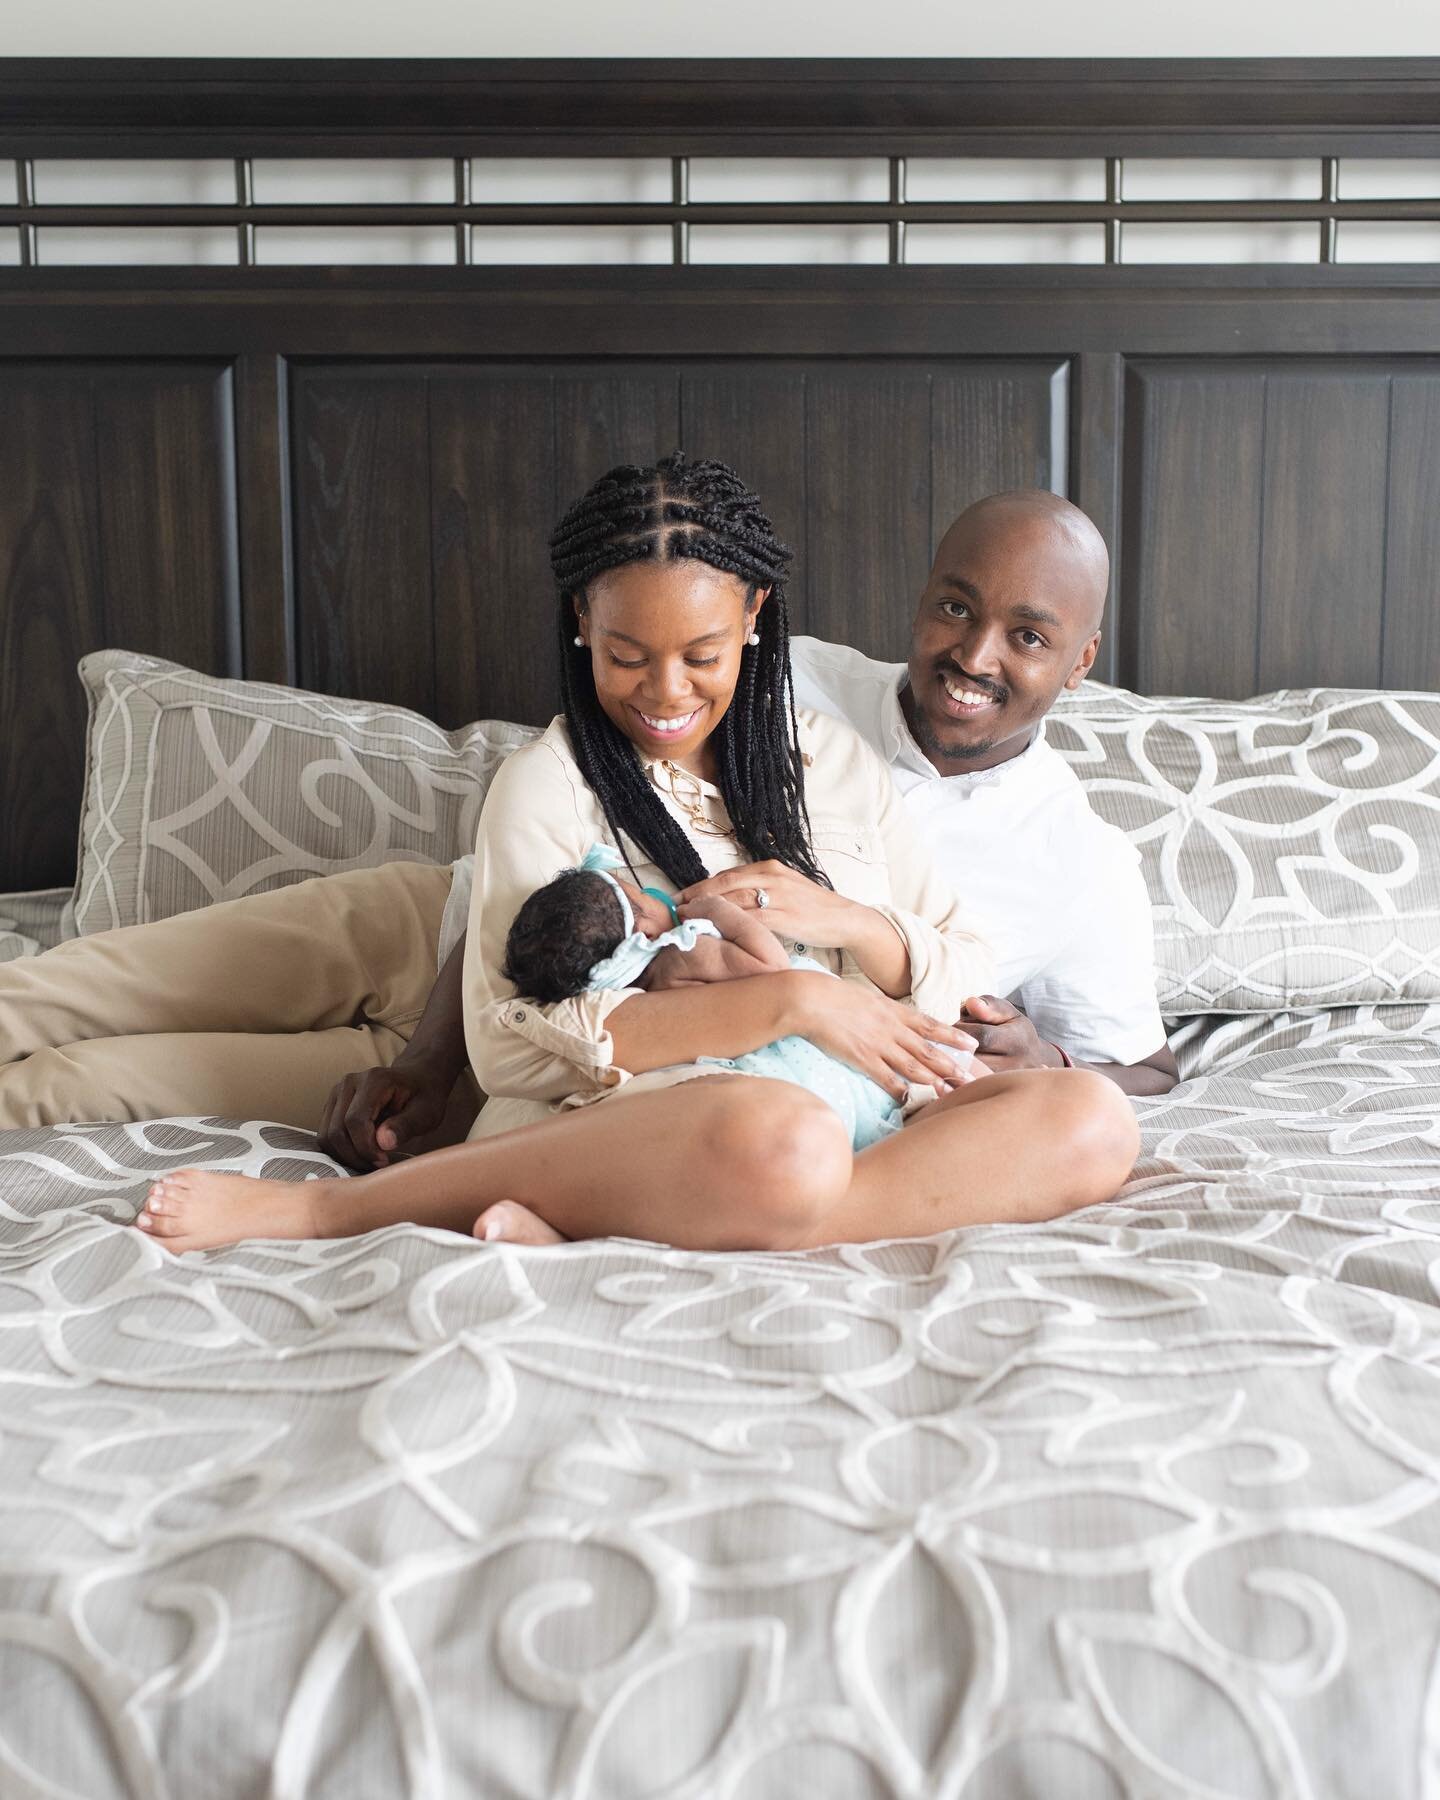 Thank you Diamond &amp; Paul for letting have a peak in your new life with Parker! She is absolutely adorable. I can already see the amount of love that is surrounding her! 🥰🥰🥰 Enjoy your new journey of parenthood!

#arielevonphotography #charlott